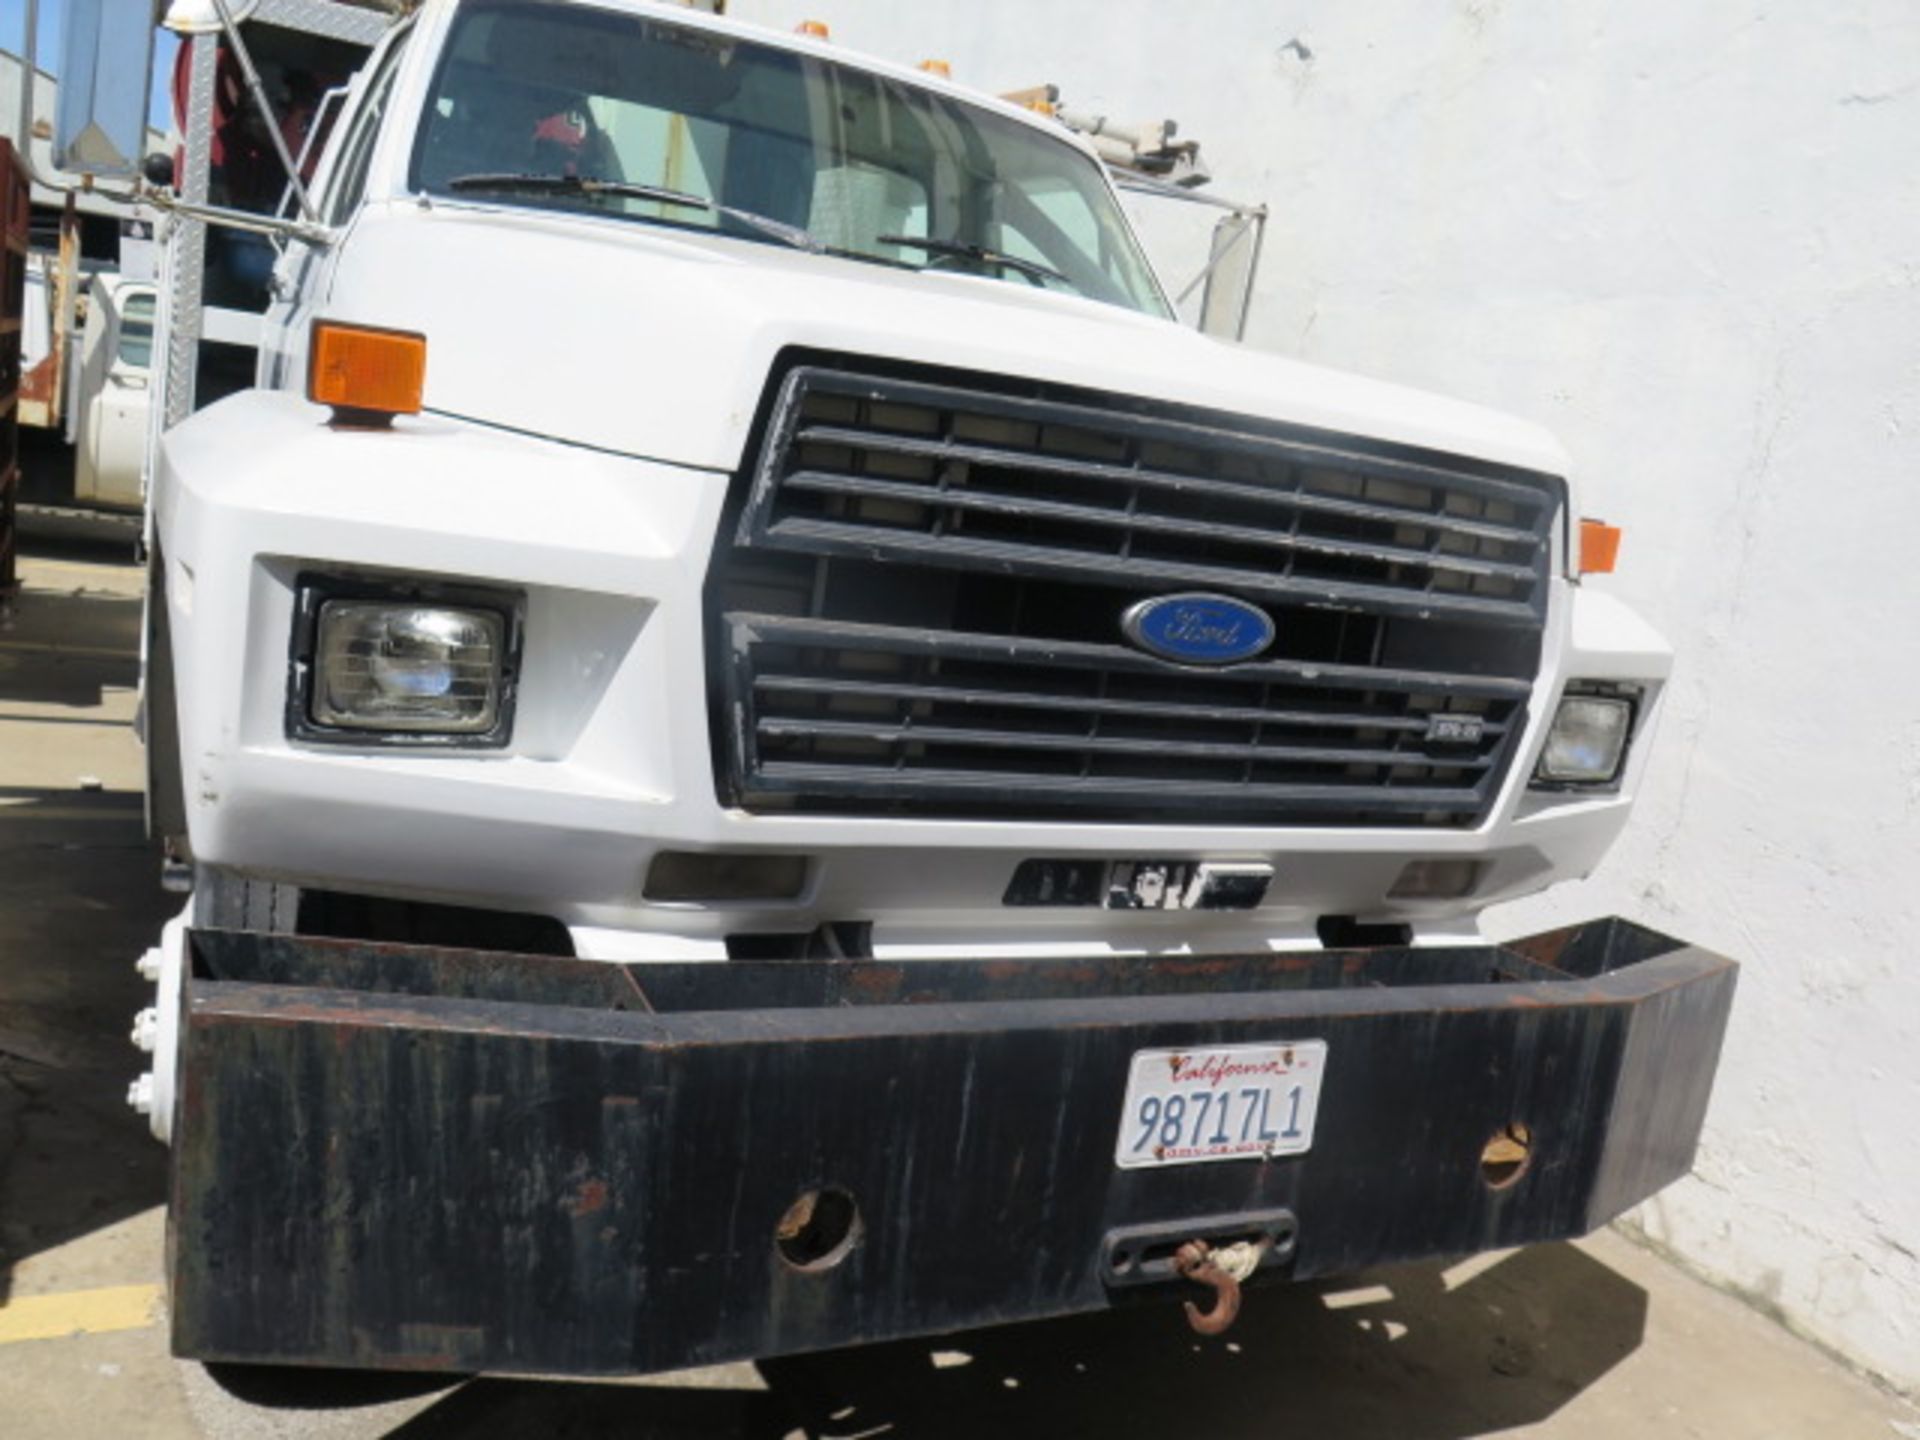 Ford 370-2V Basket Boom Lift Srv Truck Lisc# 98717L1 w/ Diesel,5-Sp Manual,NOT FOR CA USE,SOLD AS IS - Image 2 of 21